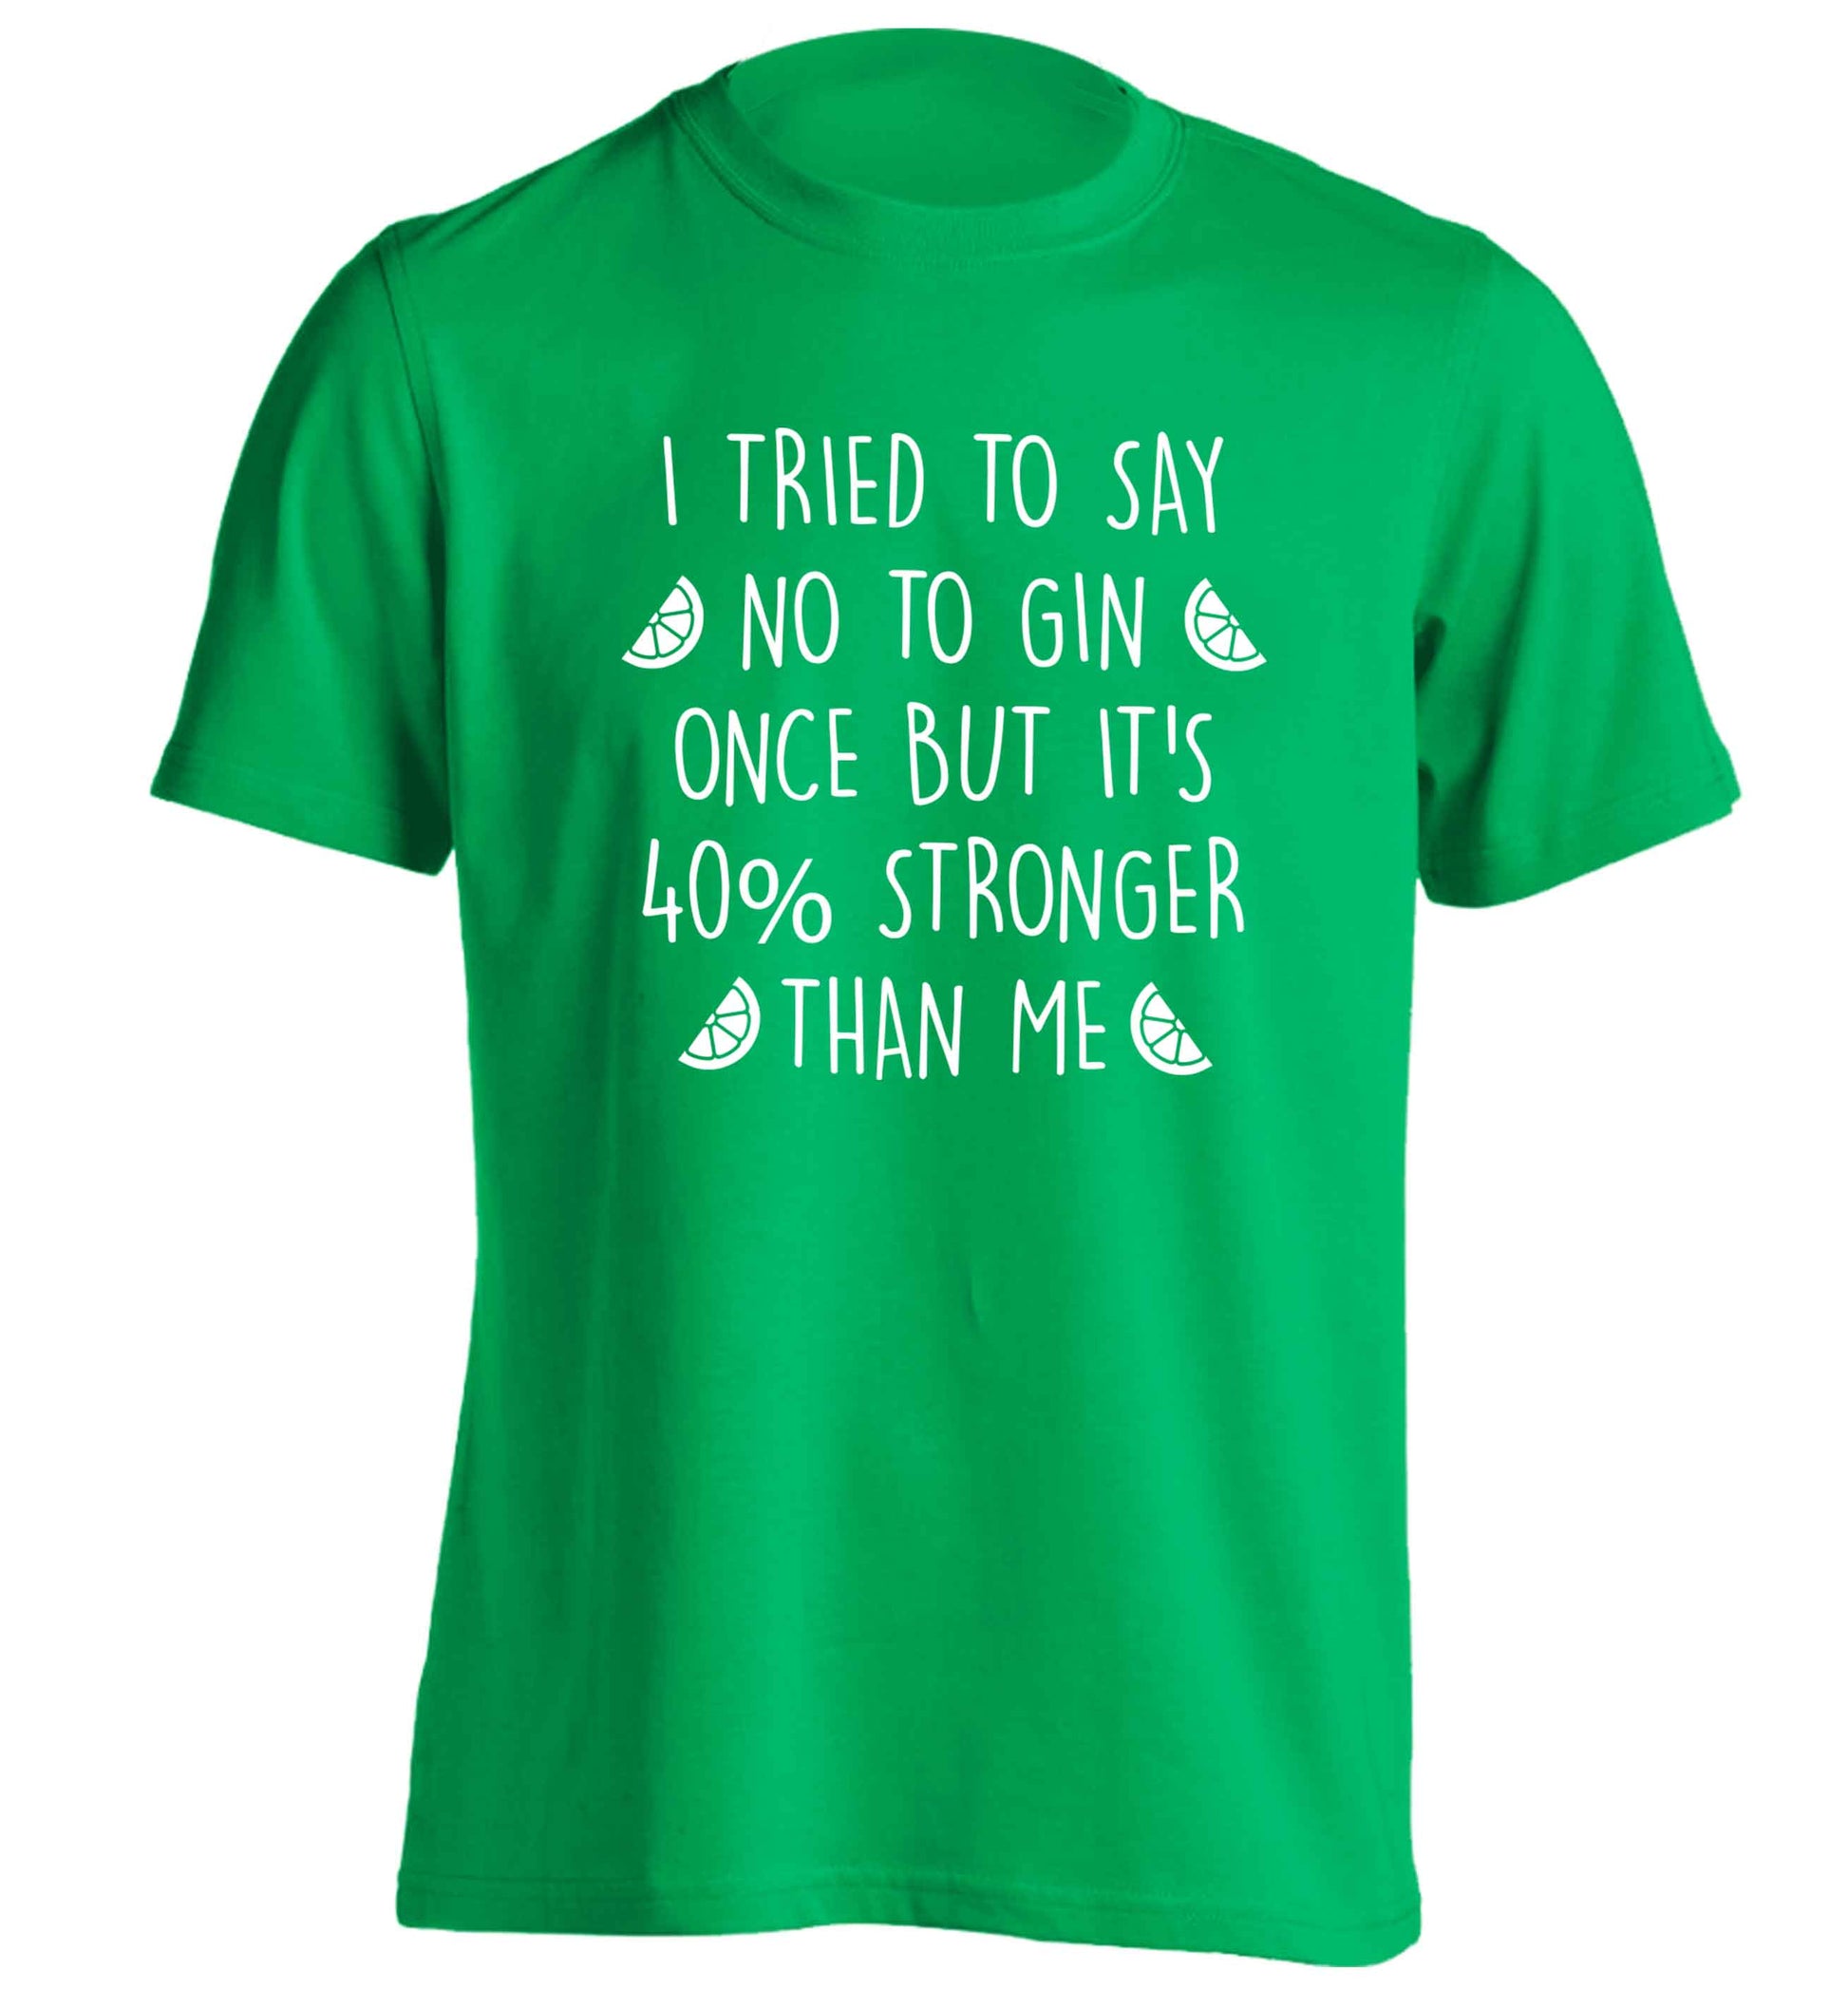 I tried to say no to gin once but it's 40% stronger than me adults unisex green Tshirt 2XL